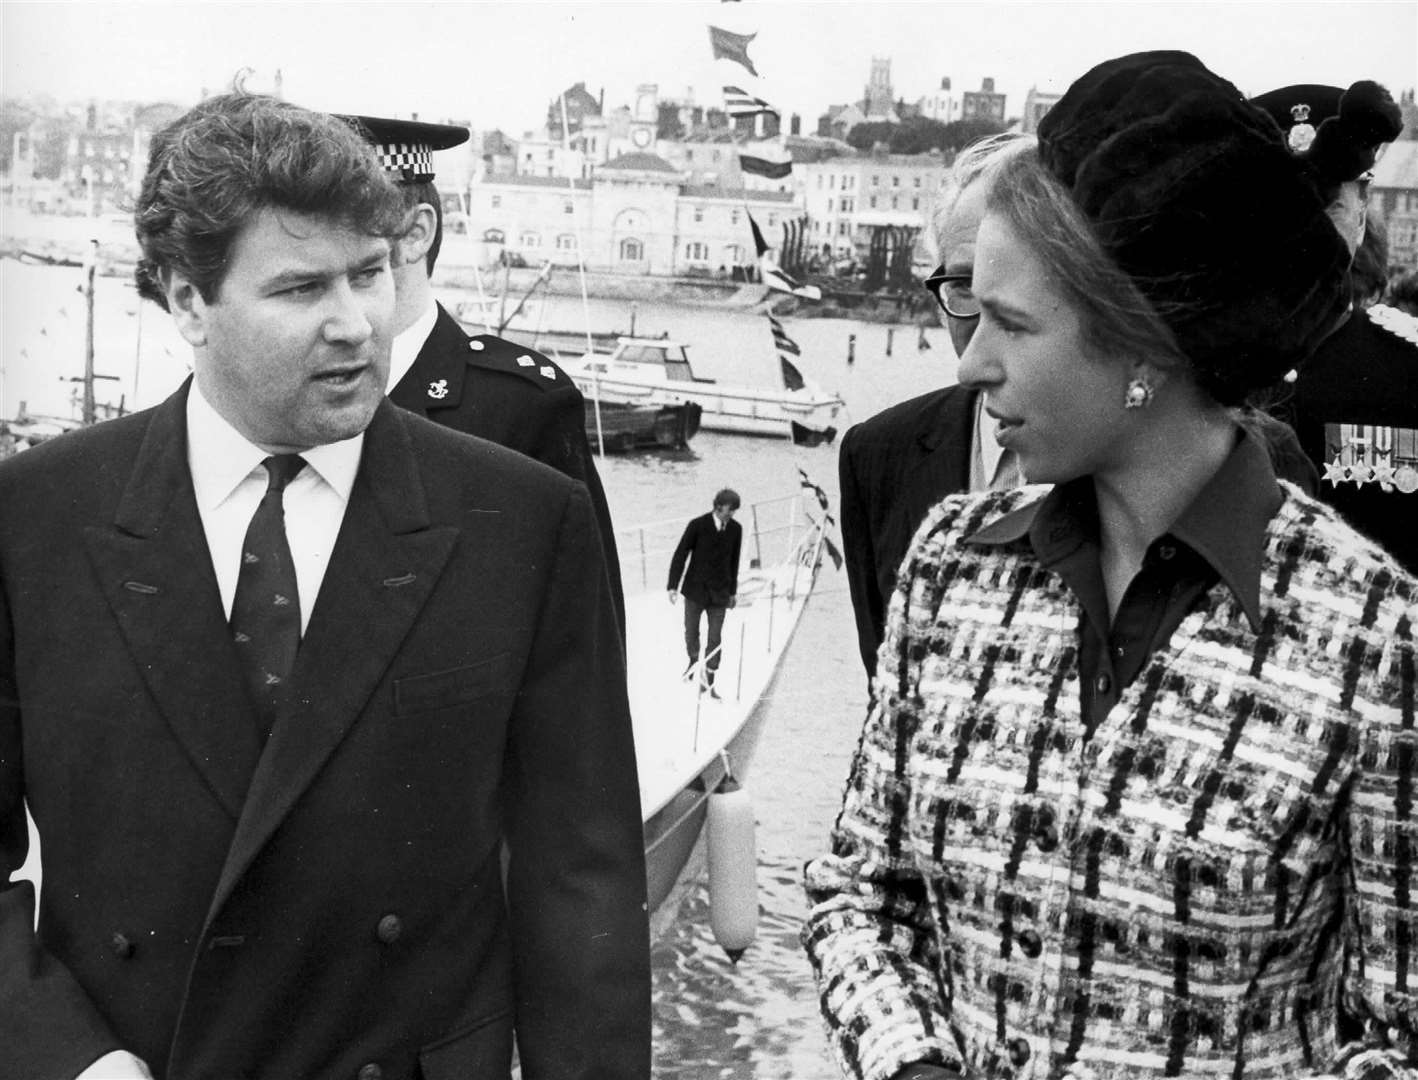 Princess Anne chatting with Chay Blyth at Ramsgate in May 1973. Two years earlier, he became the first person to sail single-handed non-stop westwards around the world